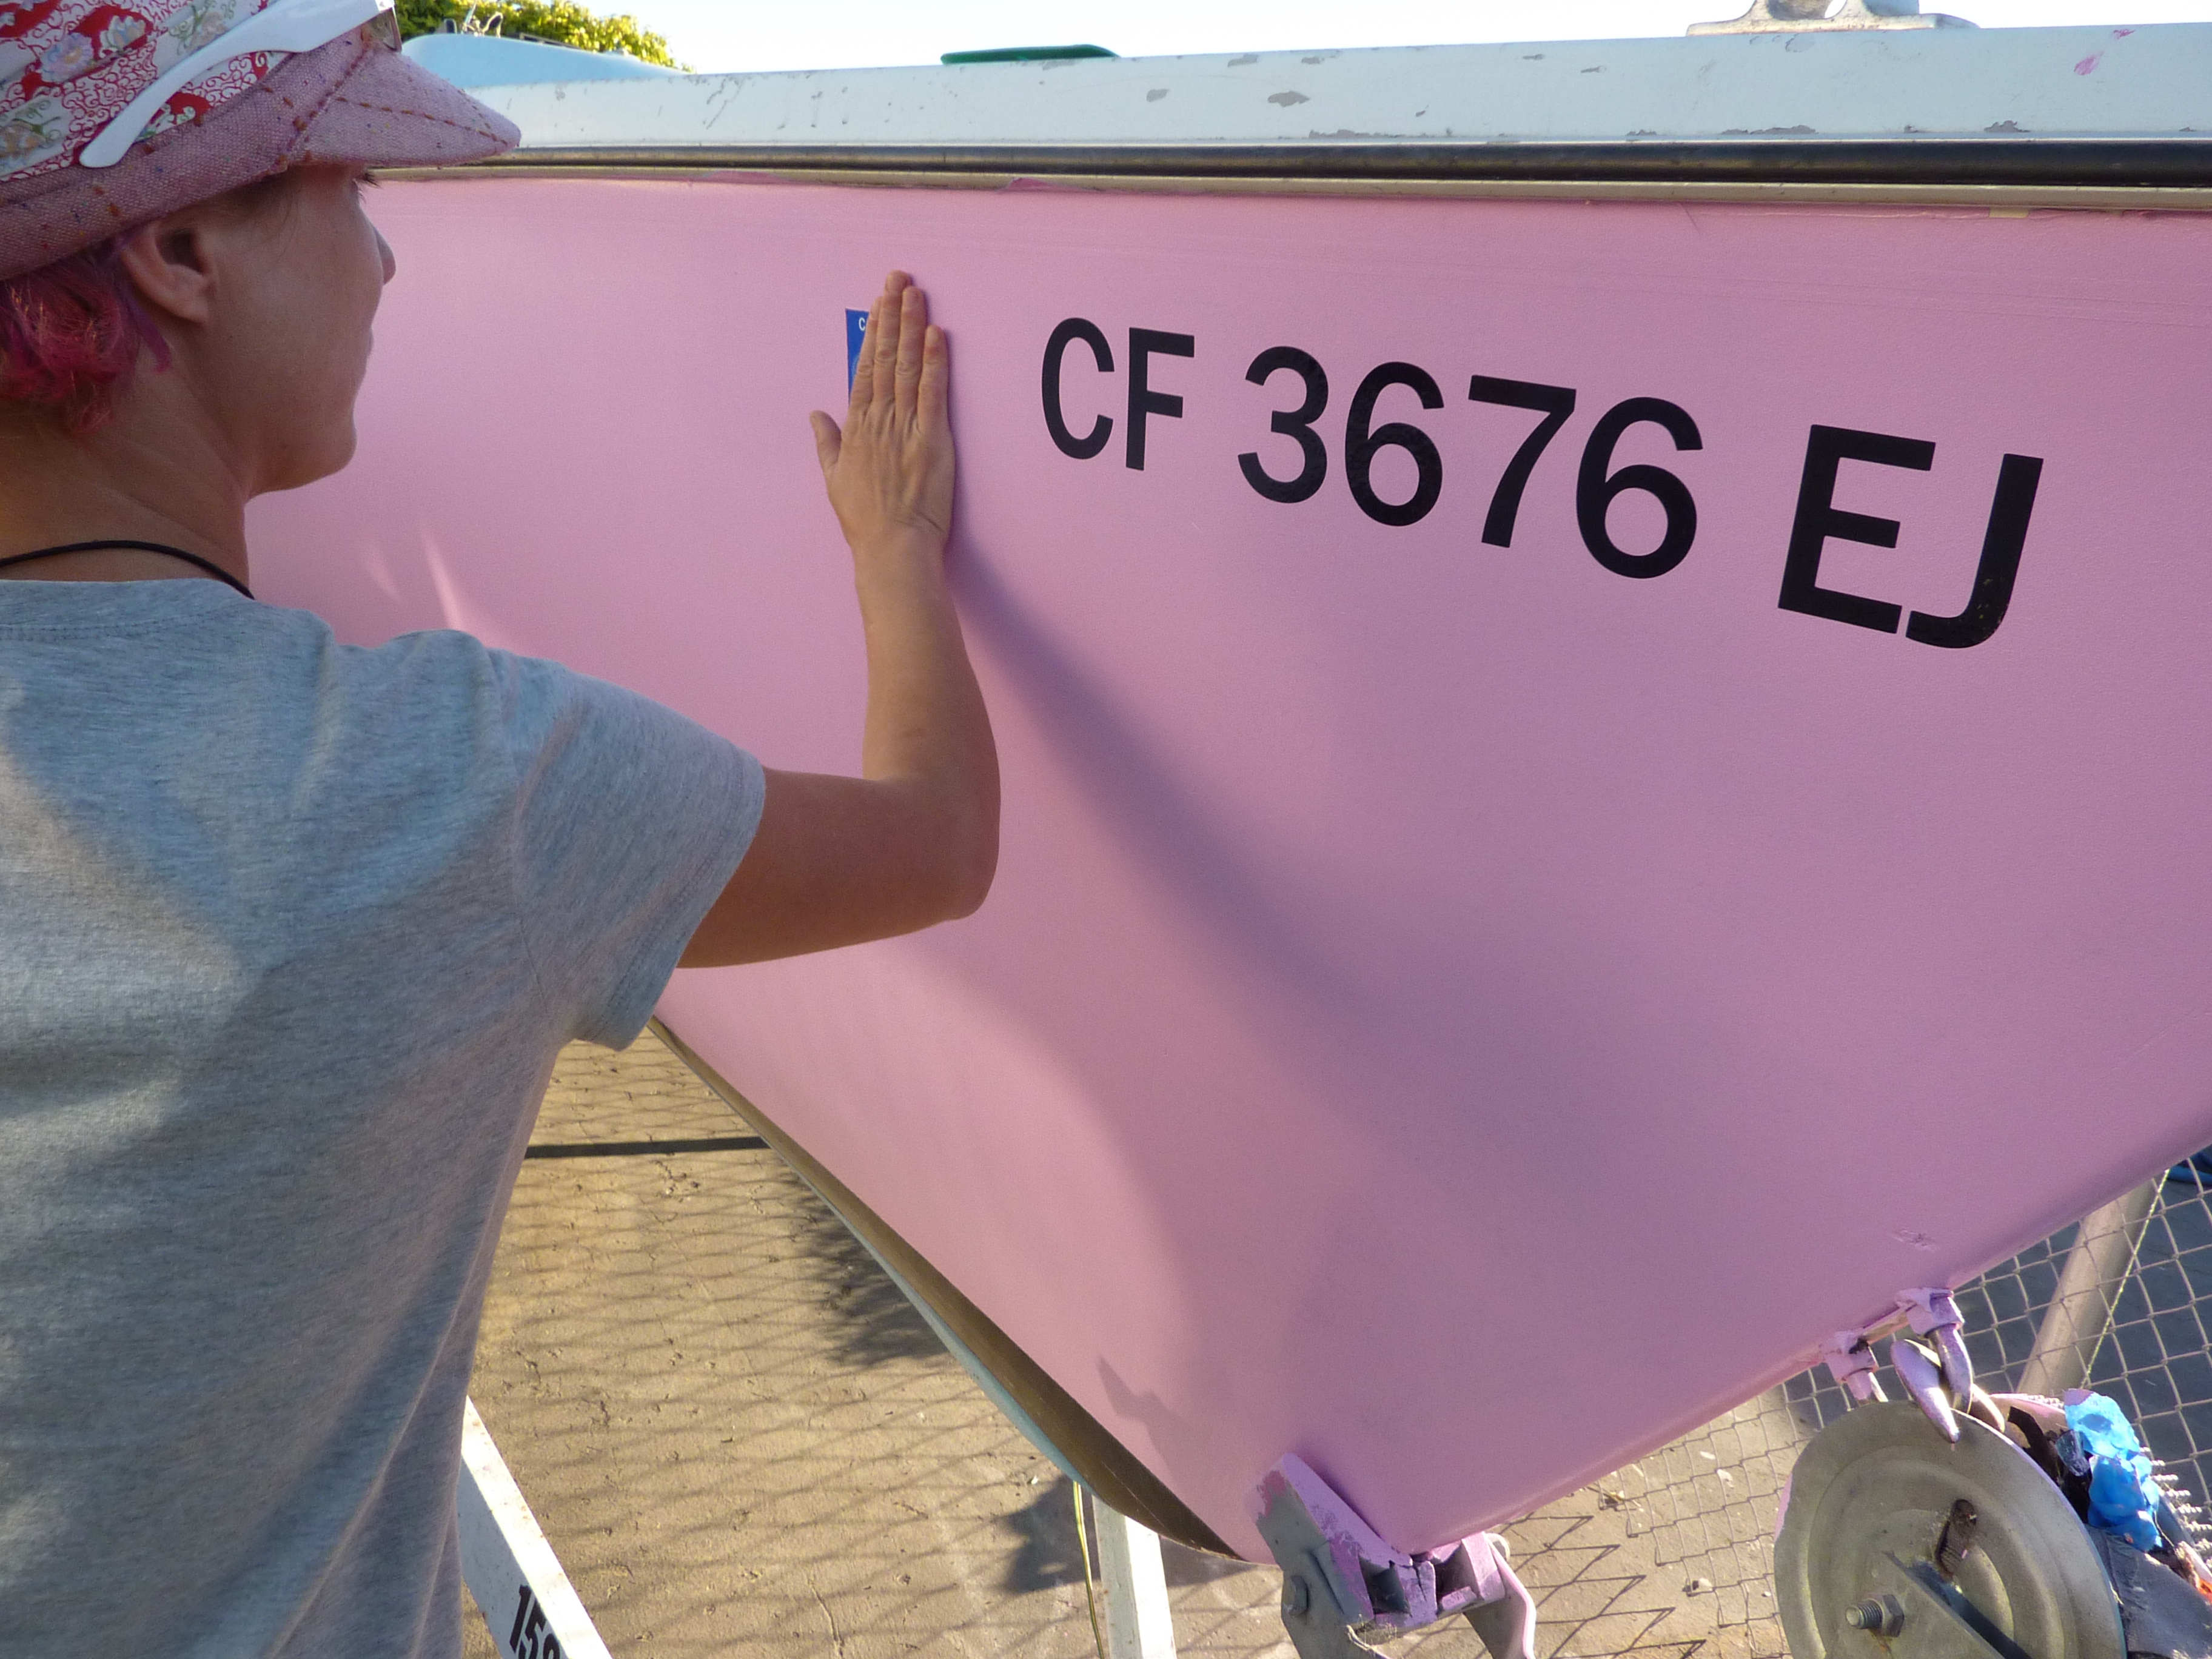 How to recreate boat registration numbers